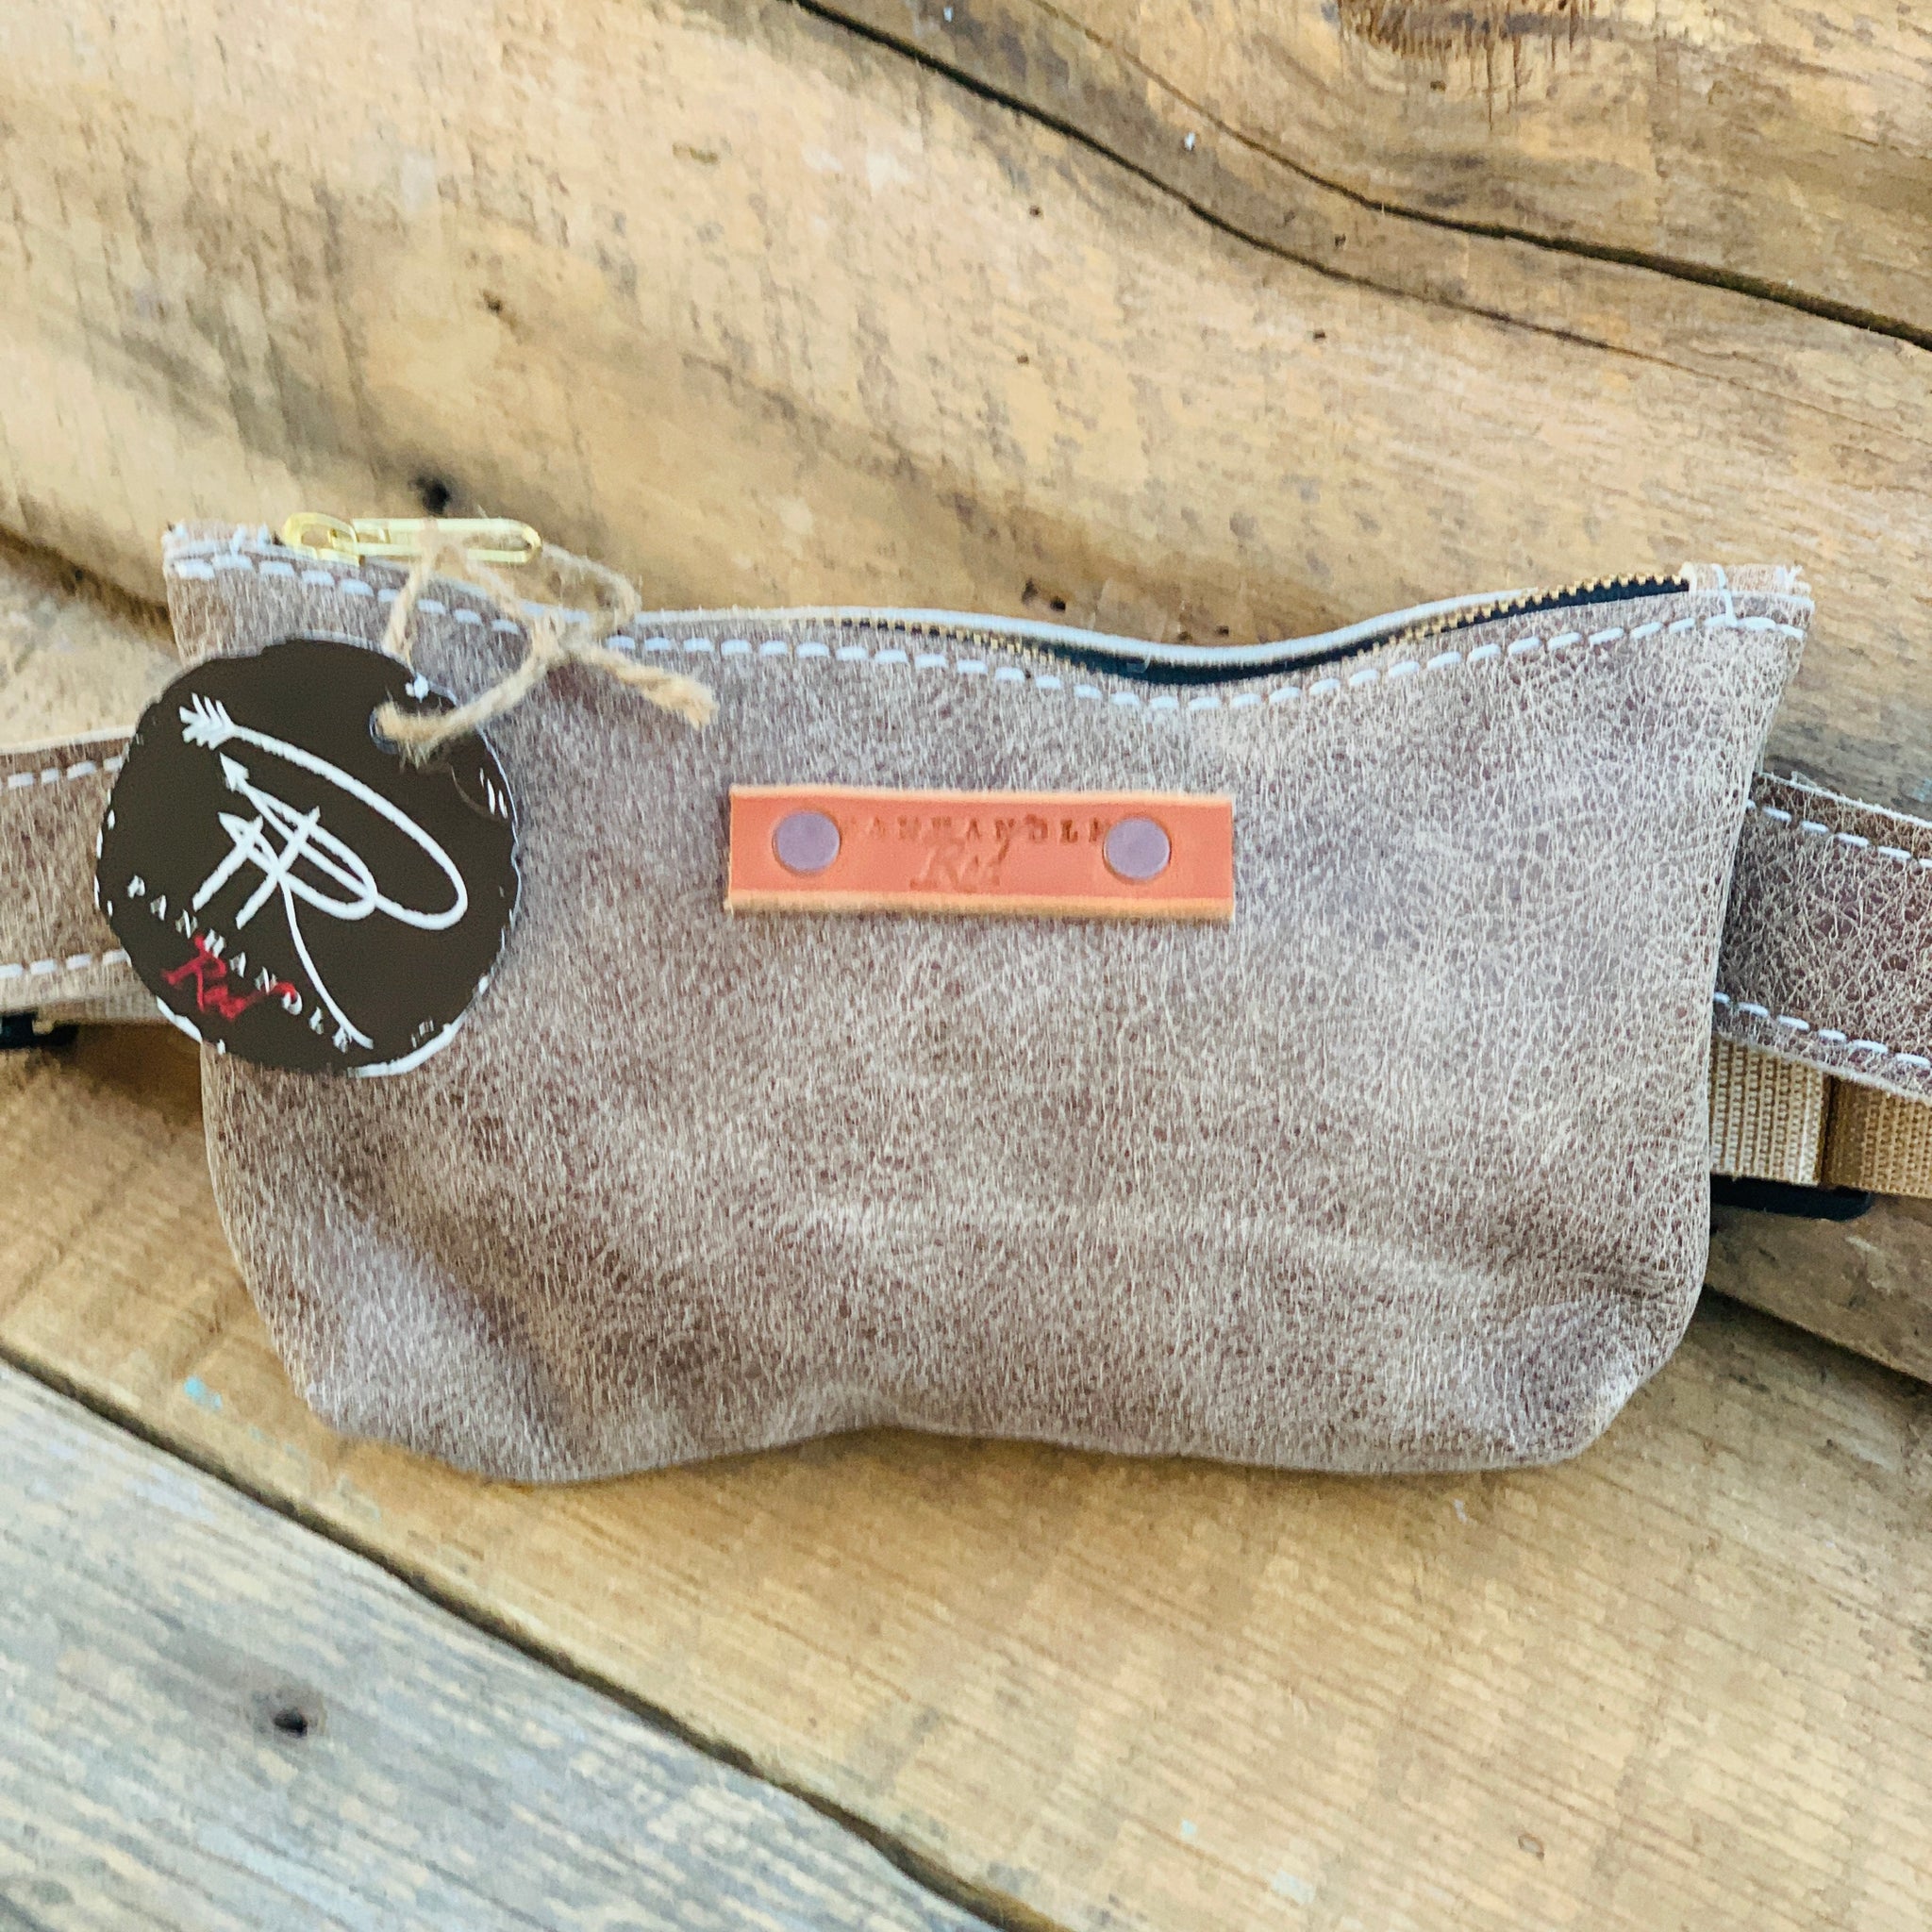 Fanny pack custom gift shop Coeur d alene idaho boutique shopping handcrafted American made birthday gift